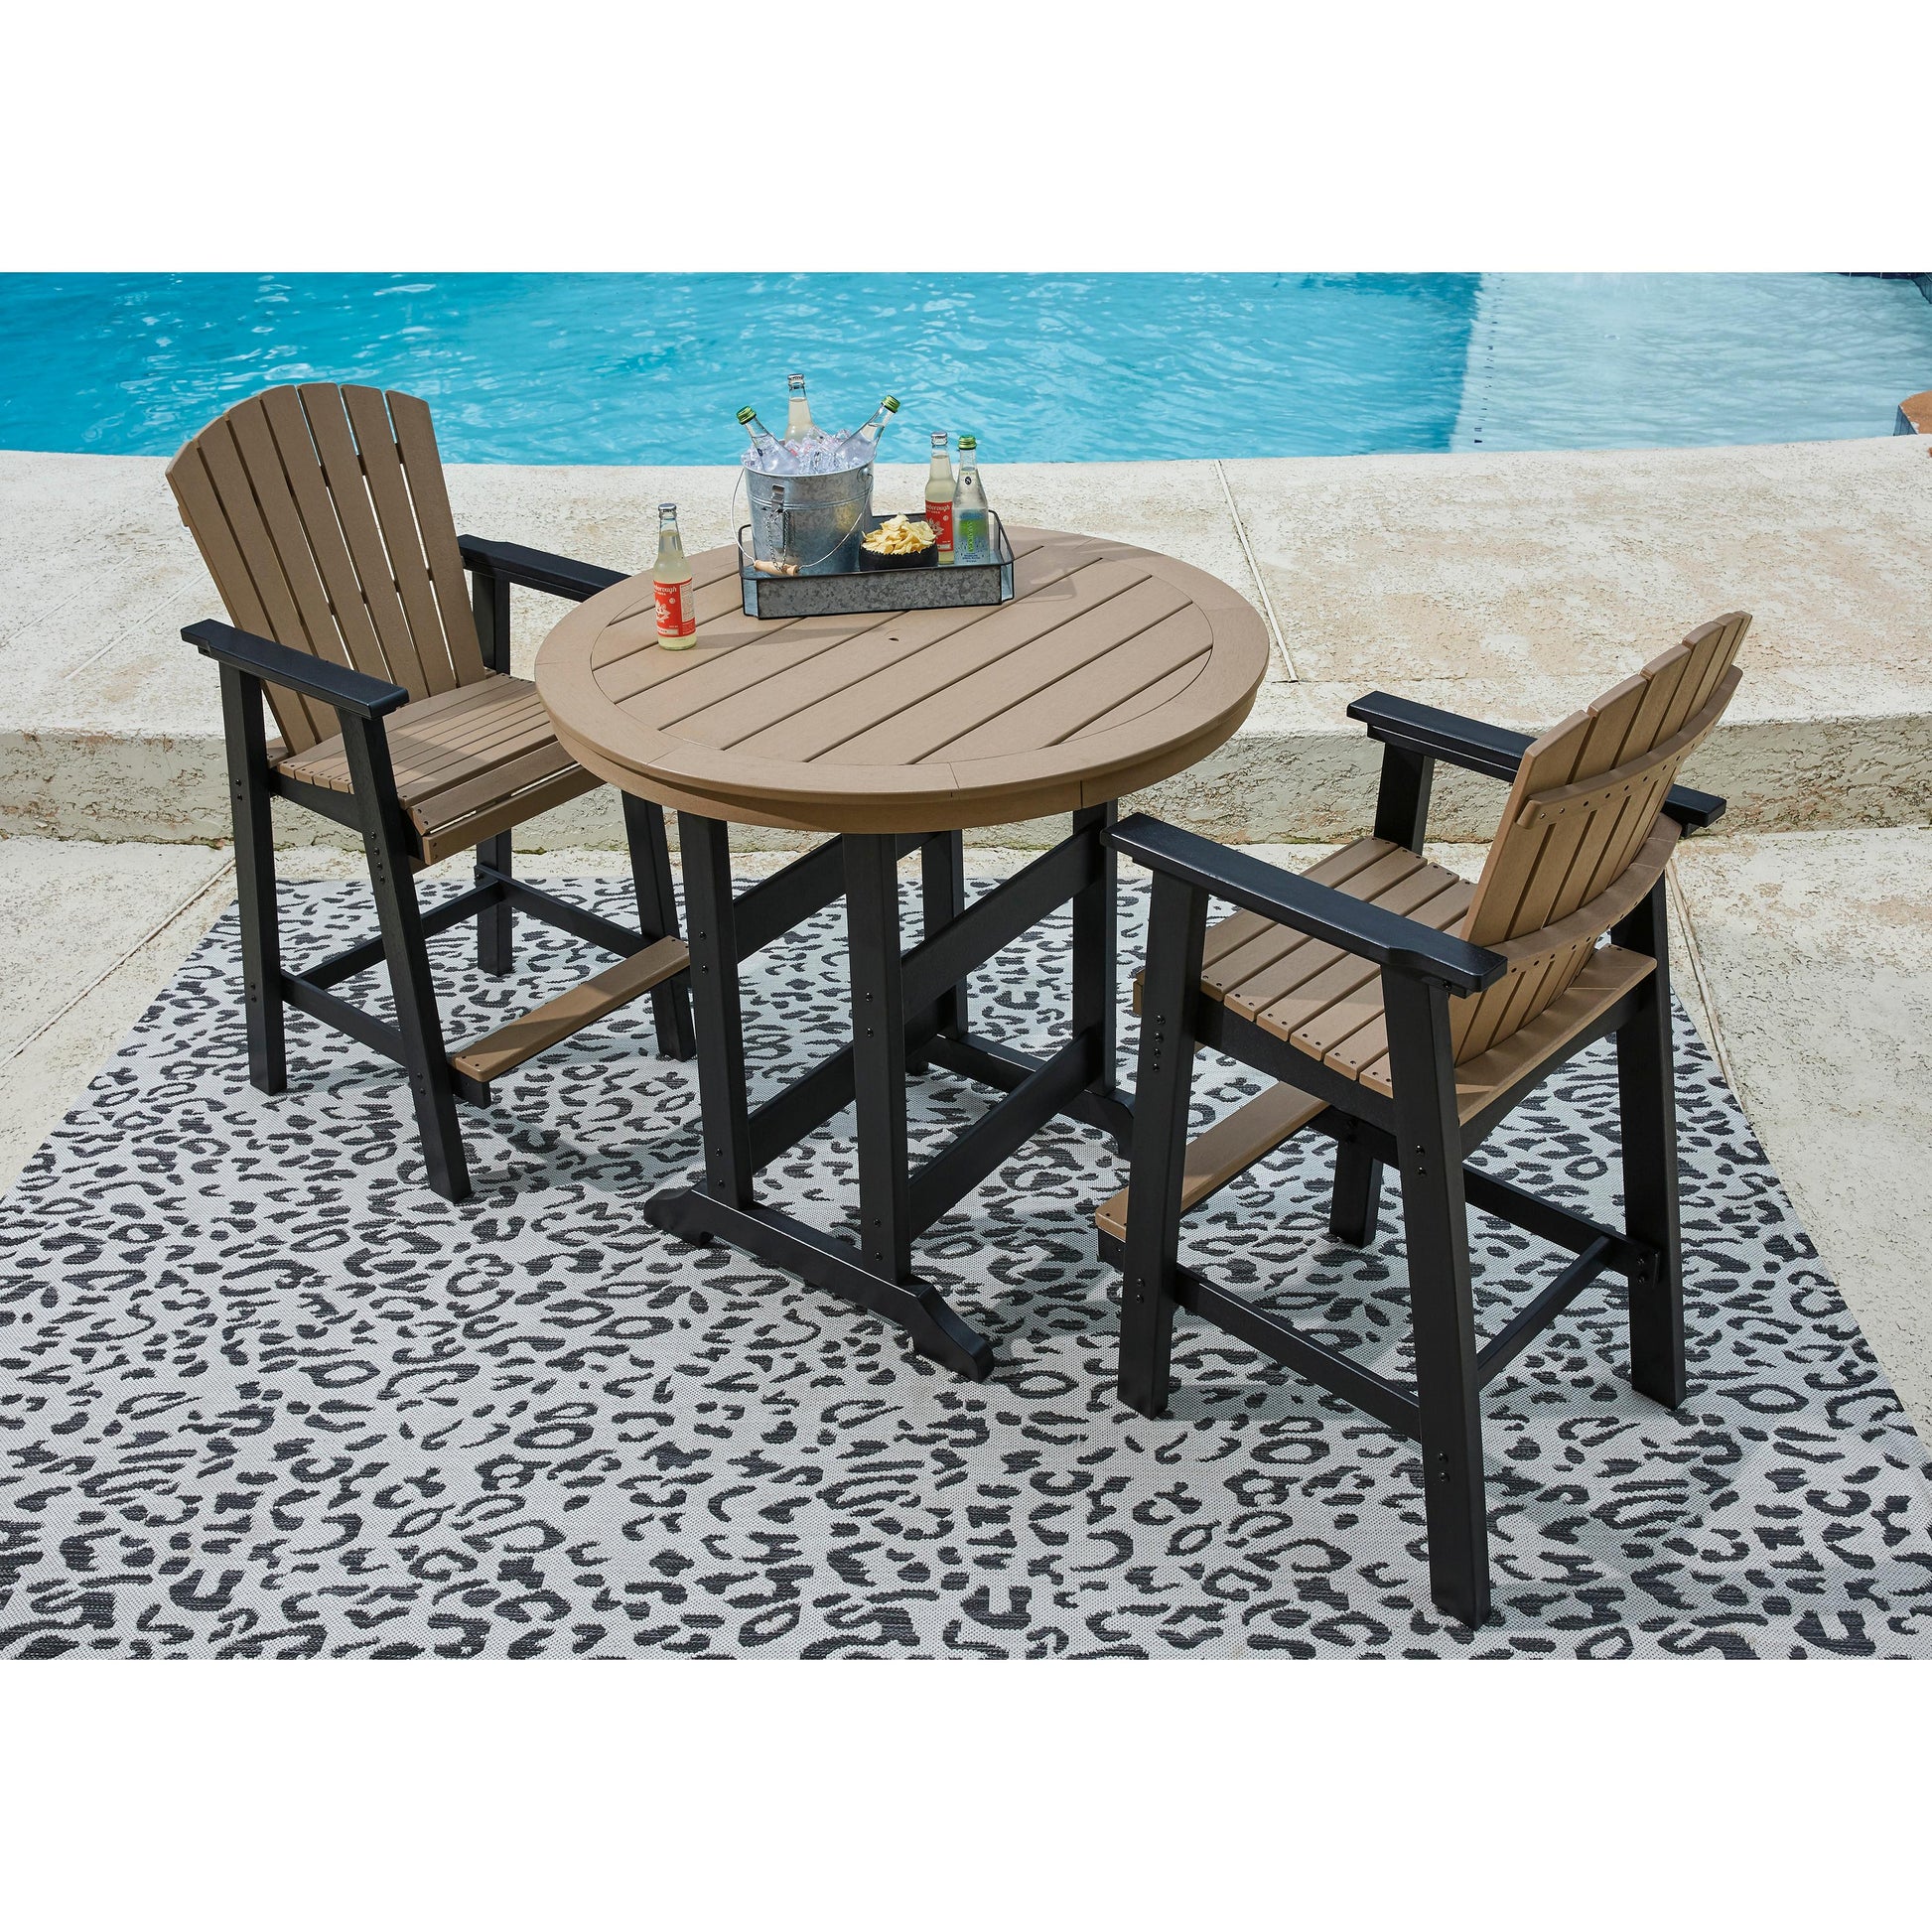 Signature Design by Ashley Outdoor Seating Stools P211-130